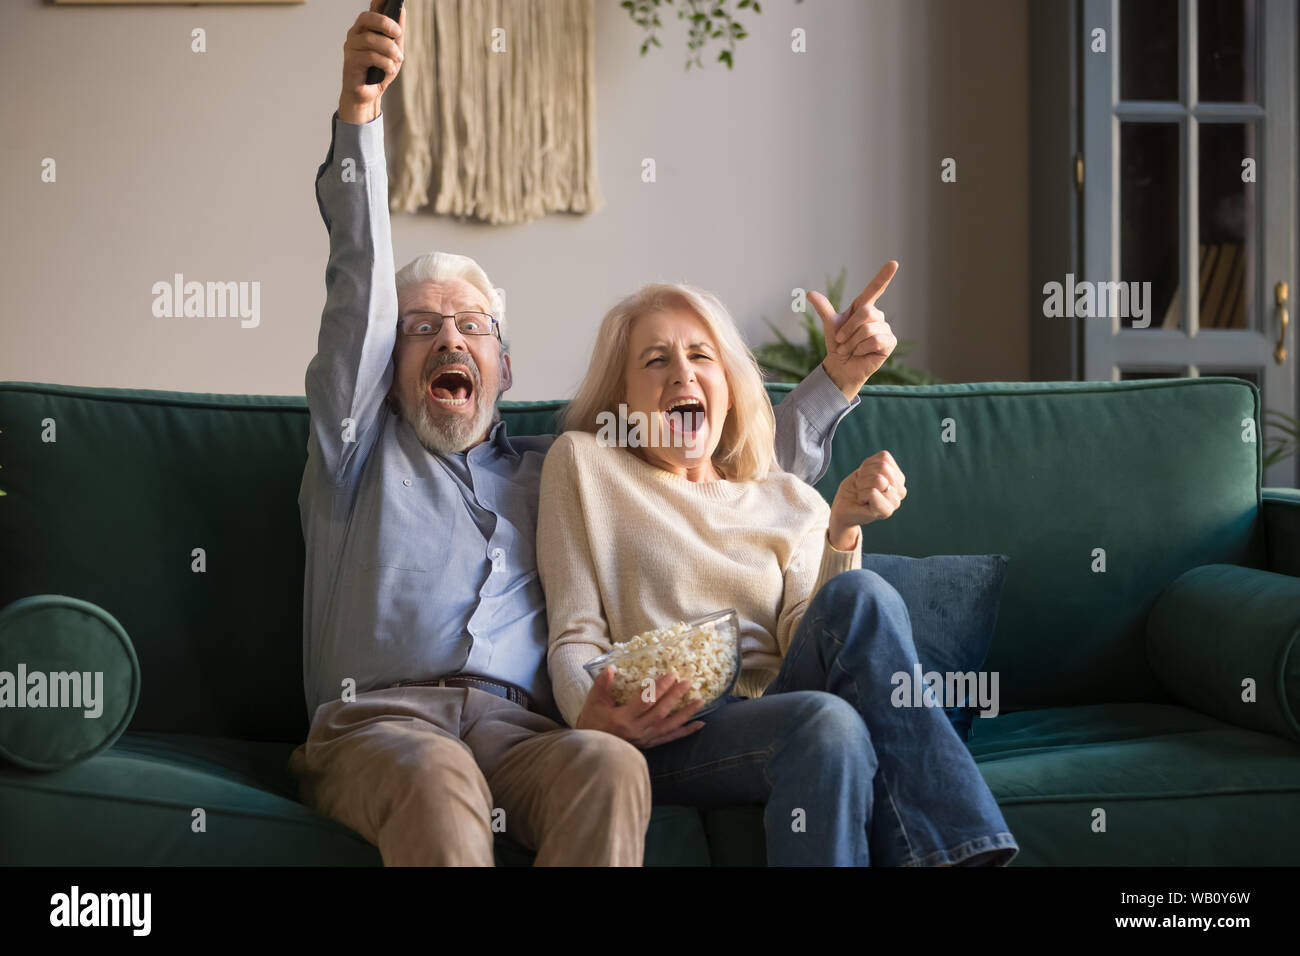 Excited old couple holding remote control watching tv celebrate victory Stock Photo